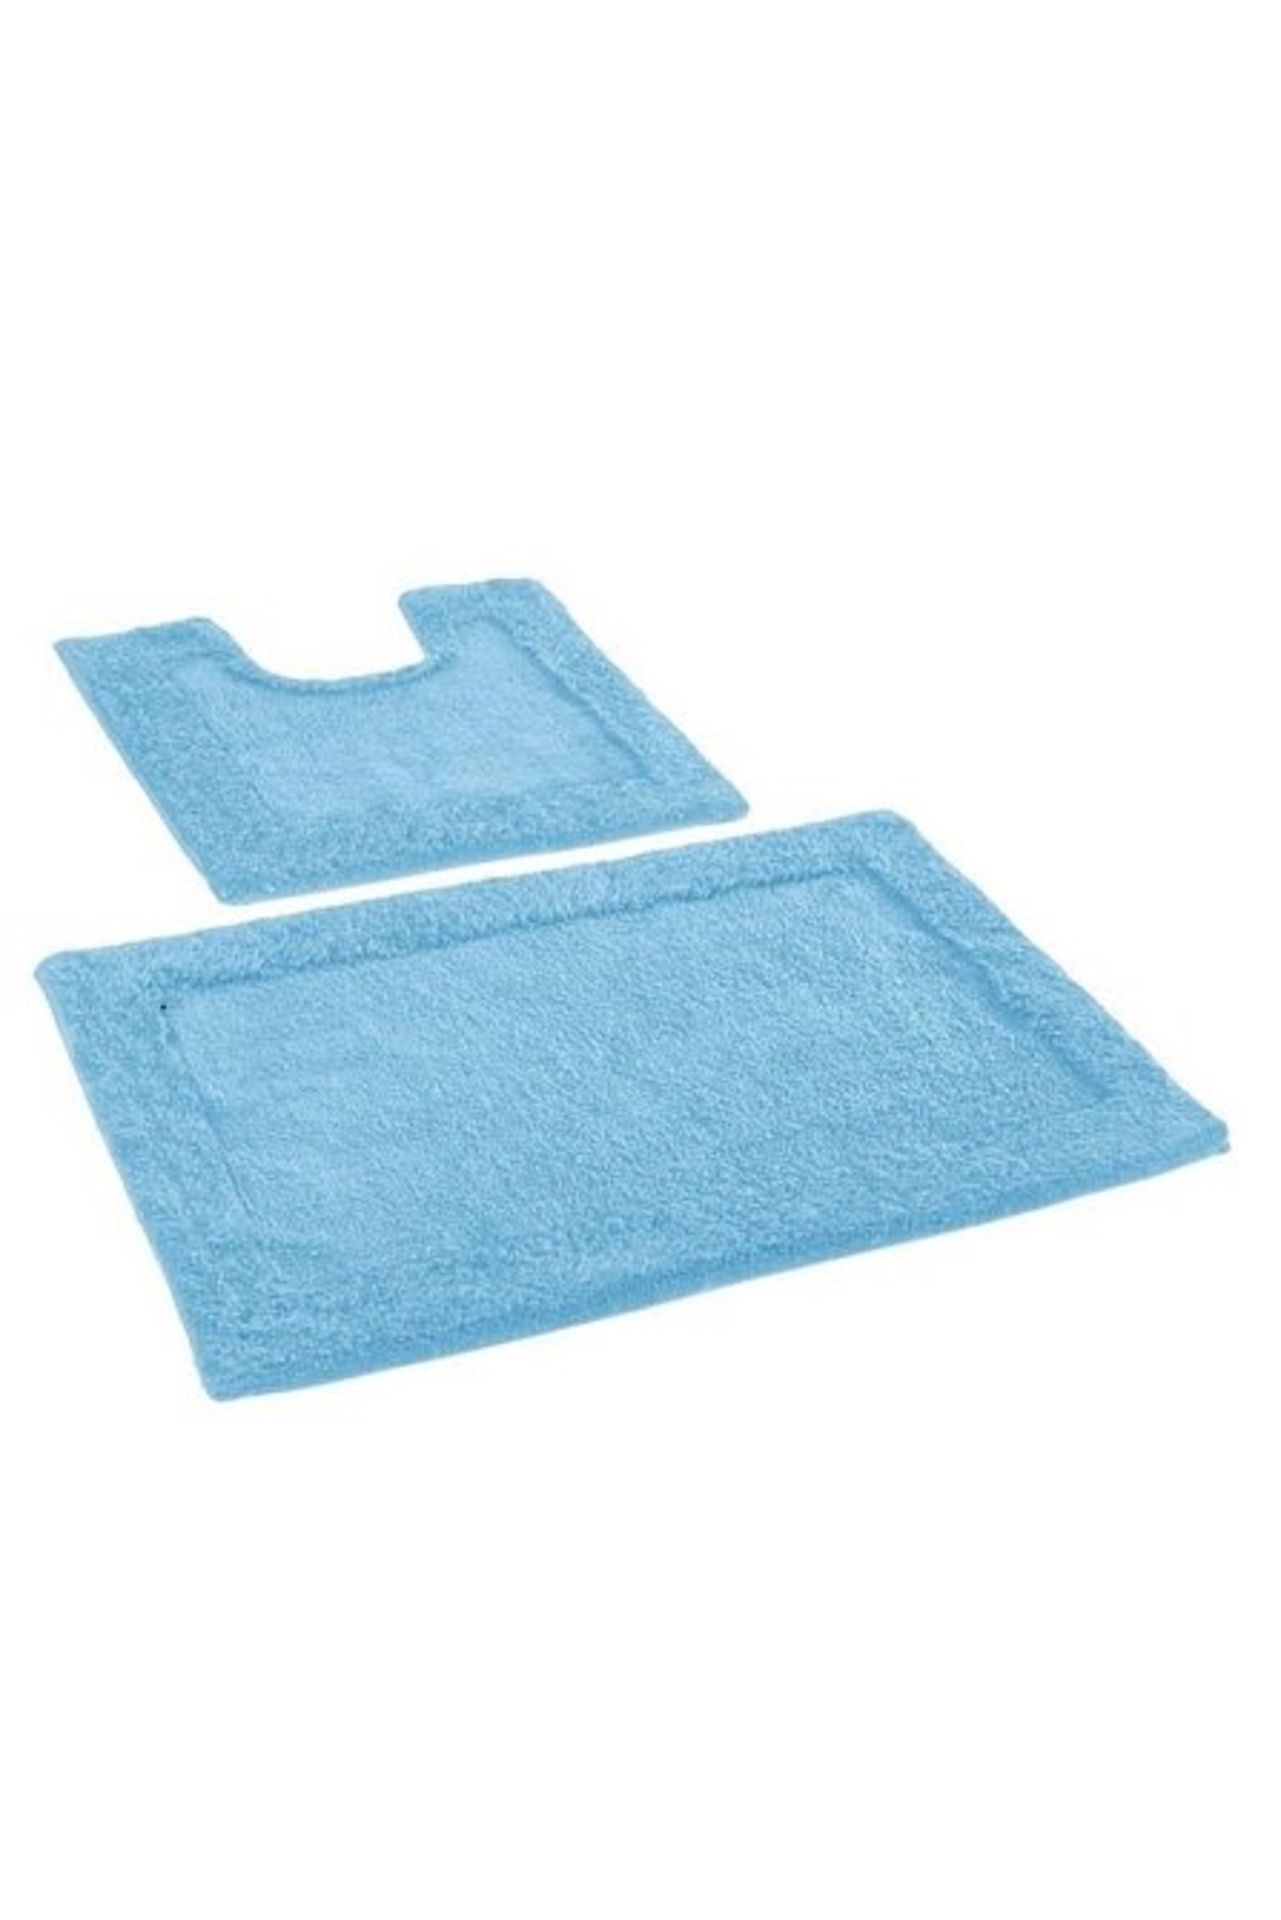 1 AS NEW BAGGED KINGSLEY 2 PIECE BATH MAT SET IN AQUA LAGOON (PUBLIC VIEWING AVAILABLE)